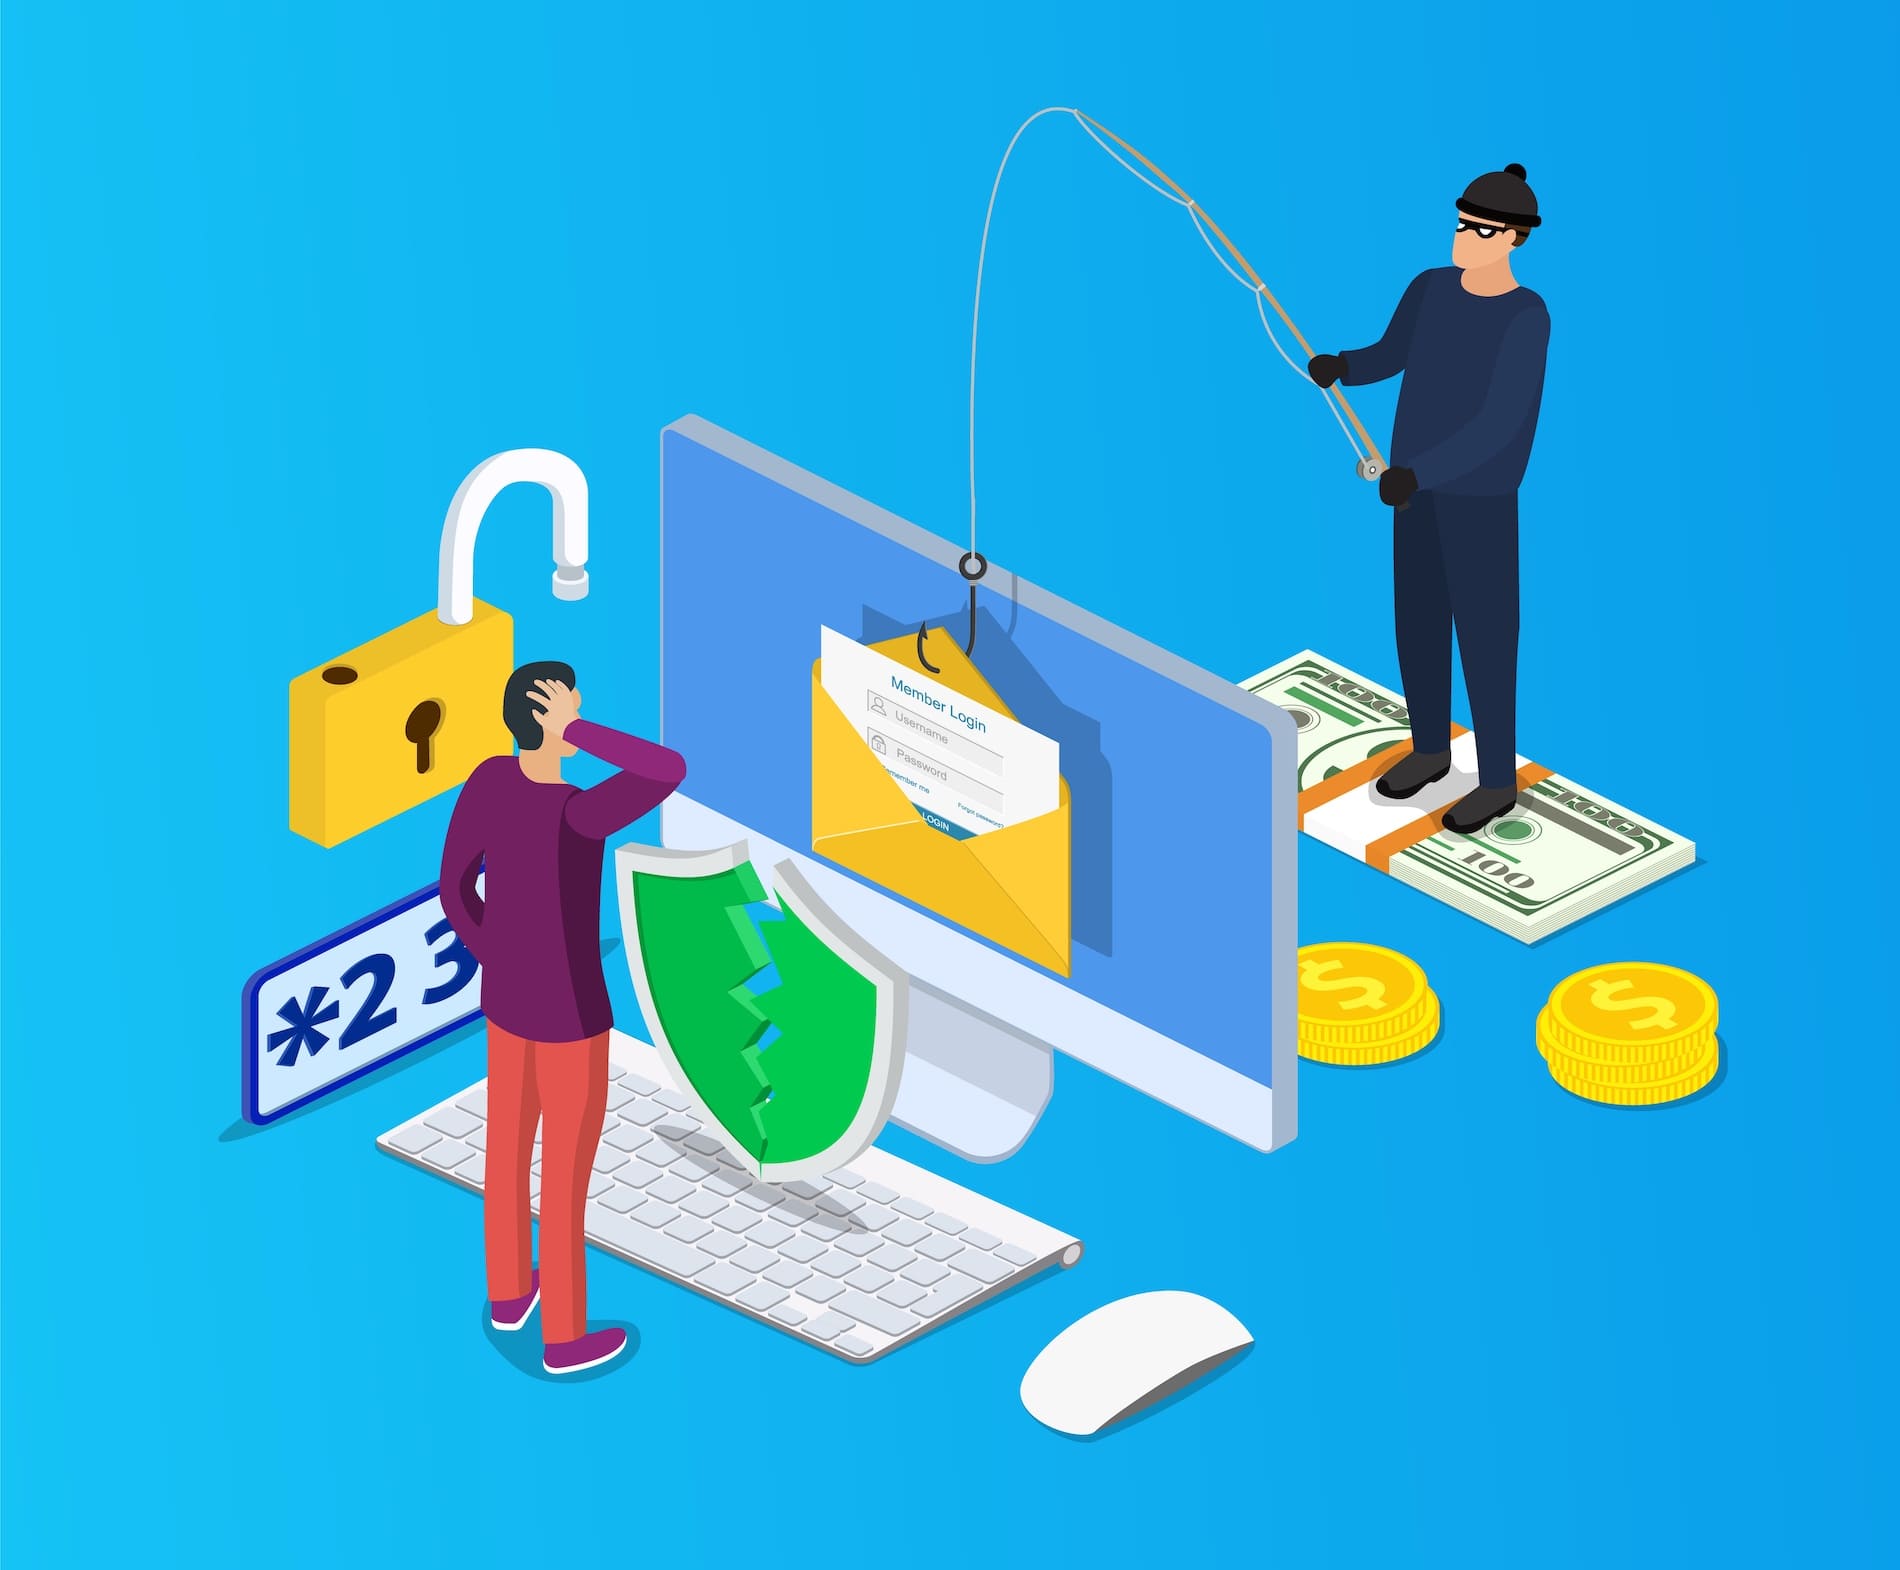 Vector of a computer with a criminal on one side holding a fishing pole representing a phishing scam.